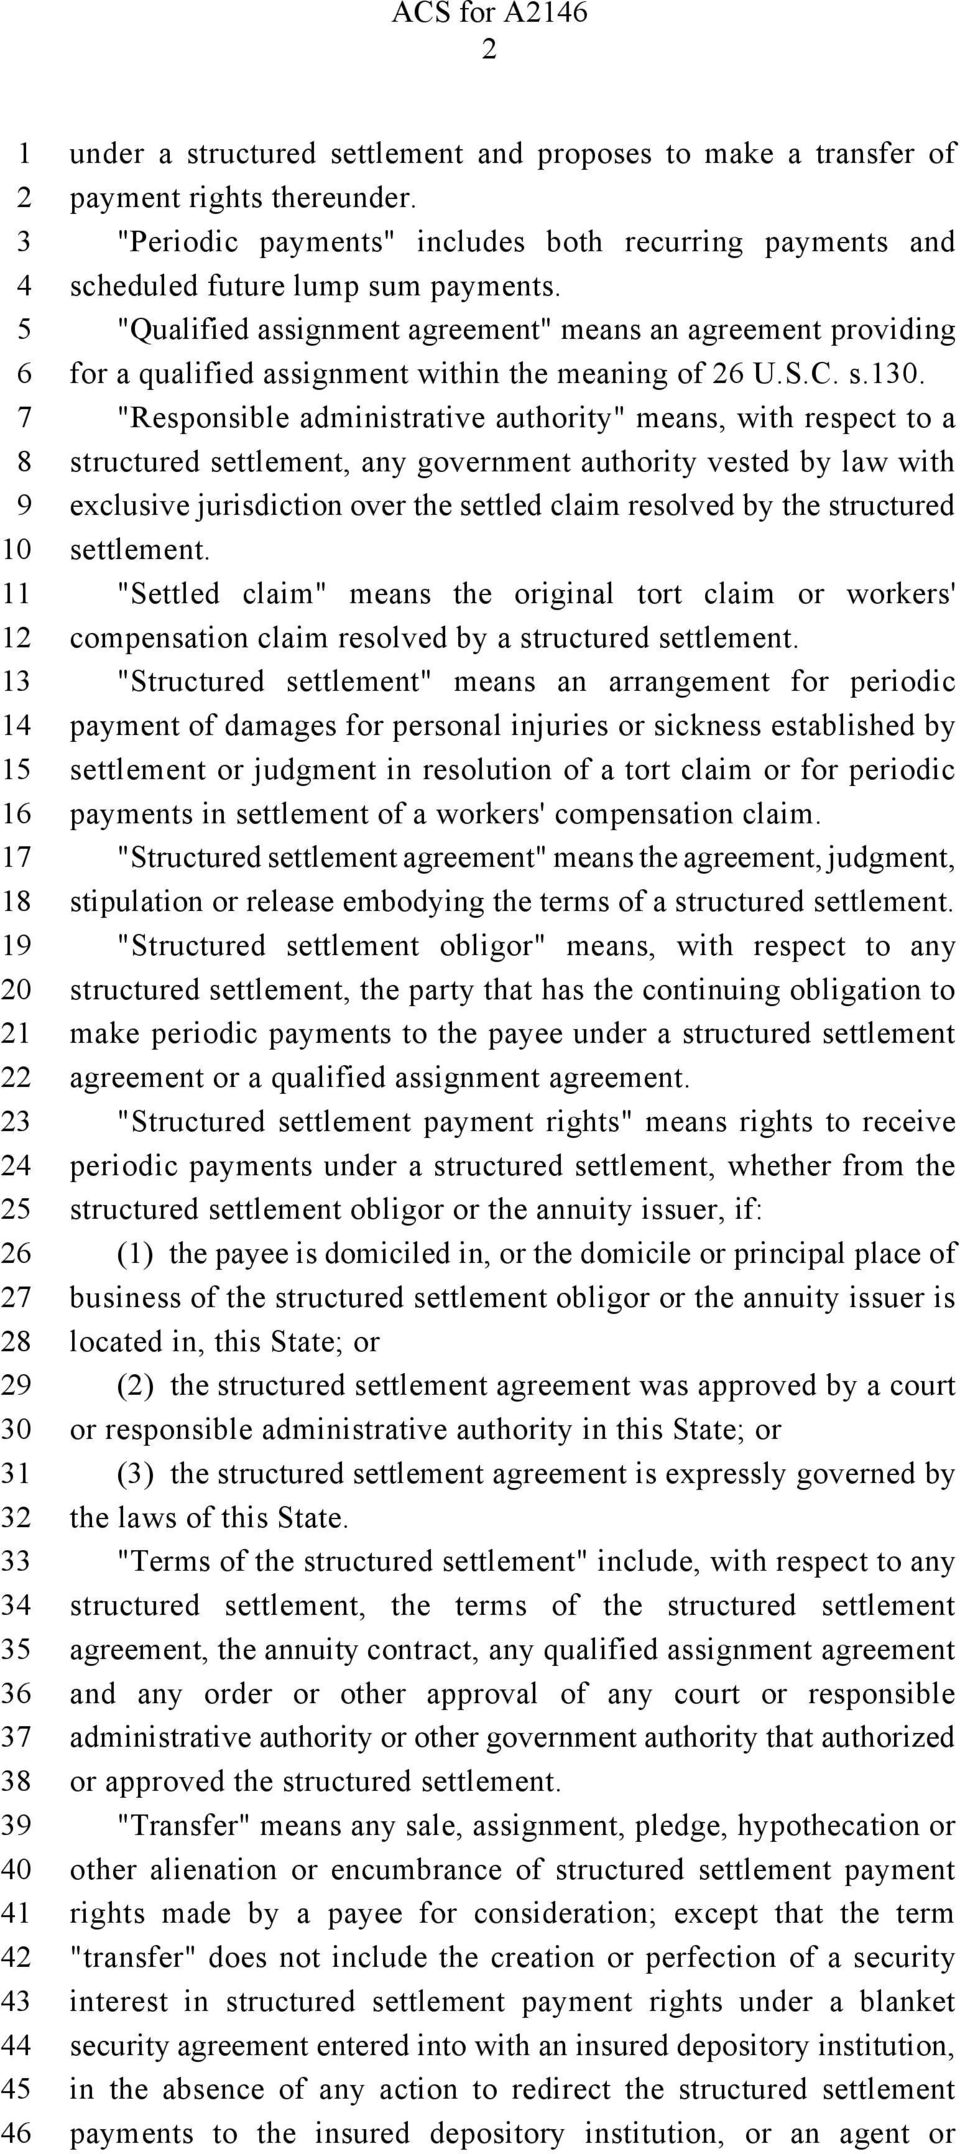 "Qualified assignment agreement" means an agreement providing for a qualified assignment within the meaning of U.S.C. s.0.